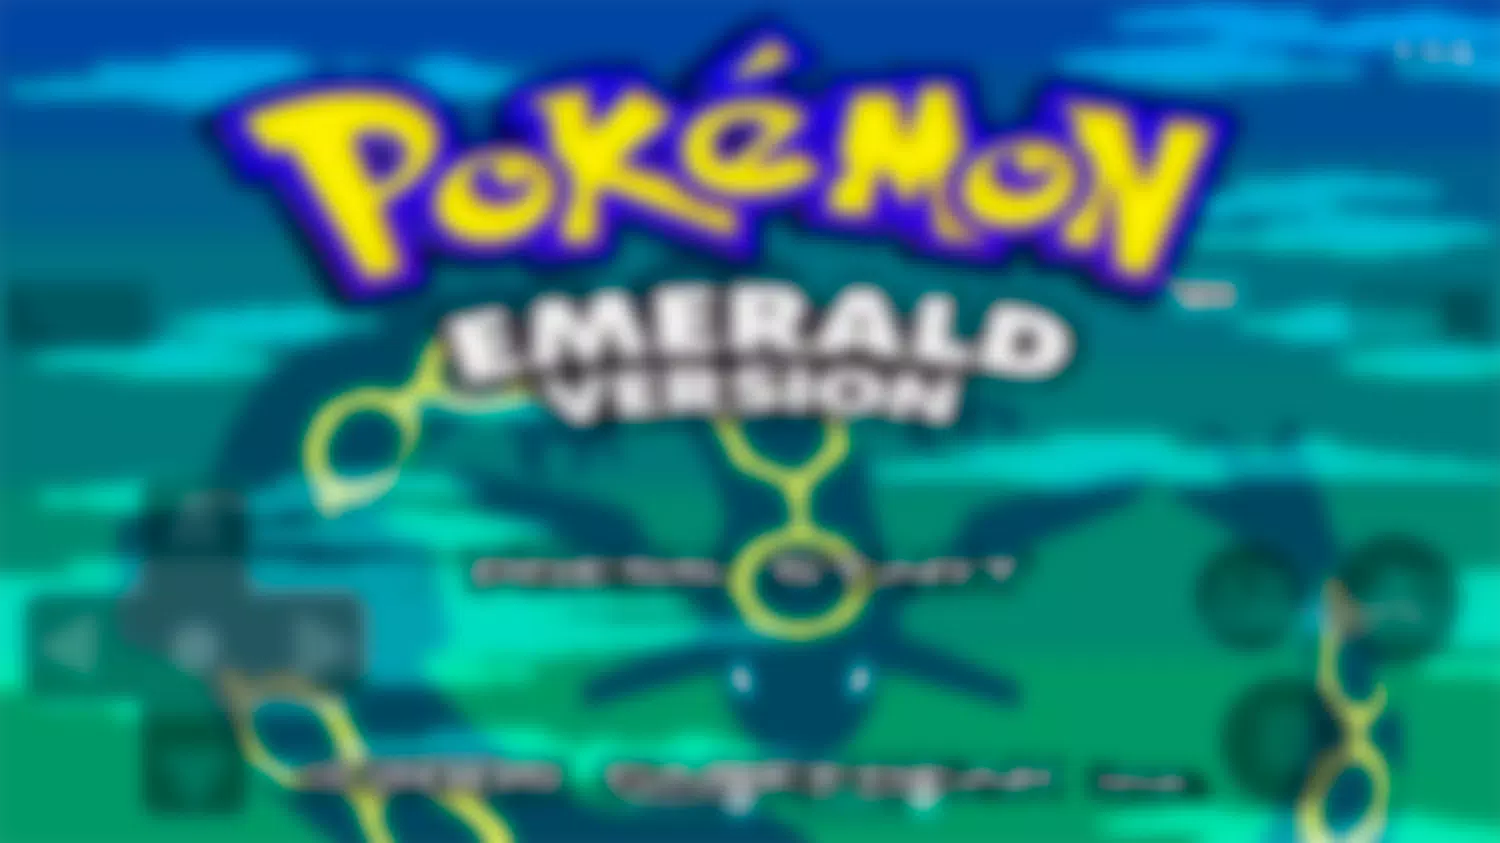 Pokemon Emerald Cracked APK Download for Android - AndroidFreeware